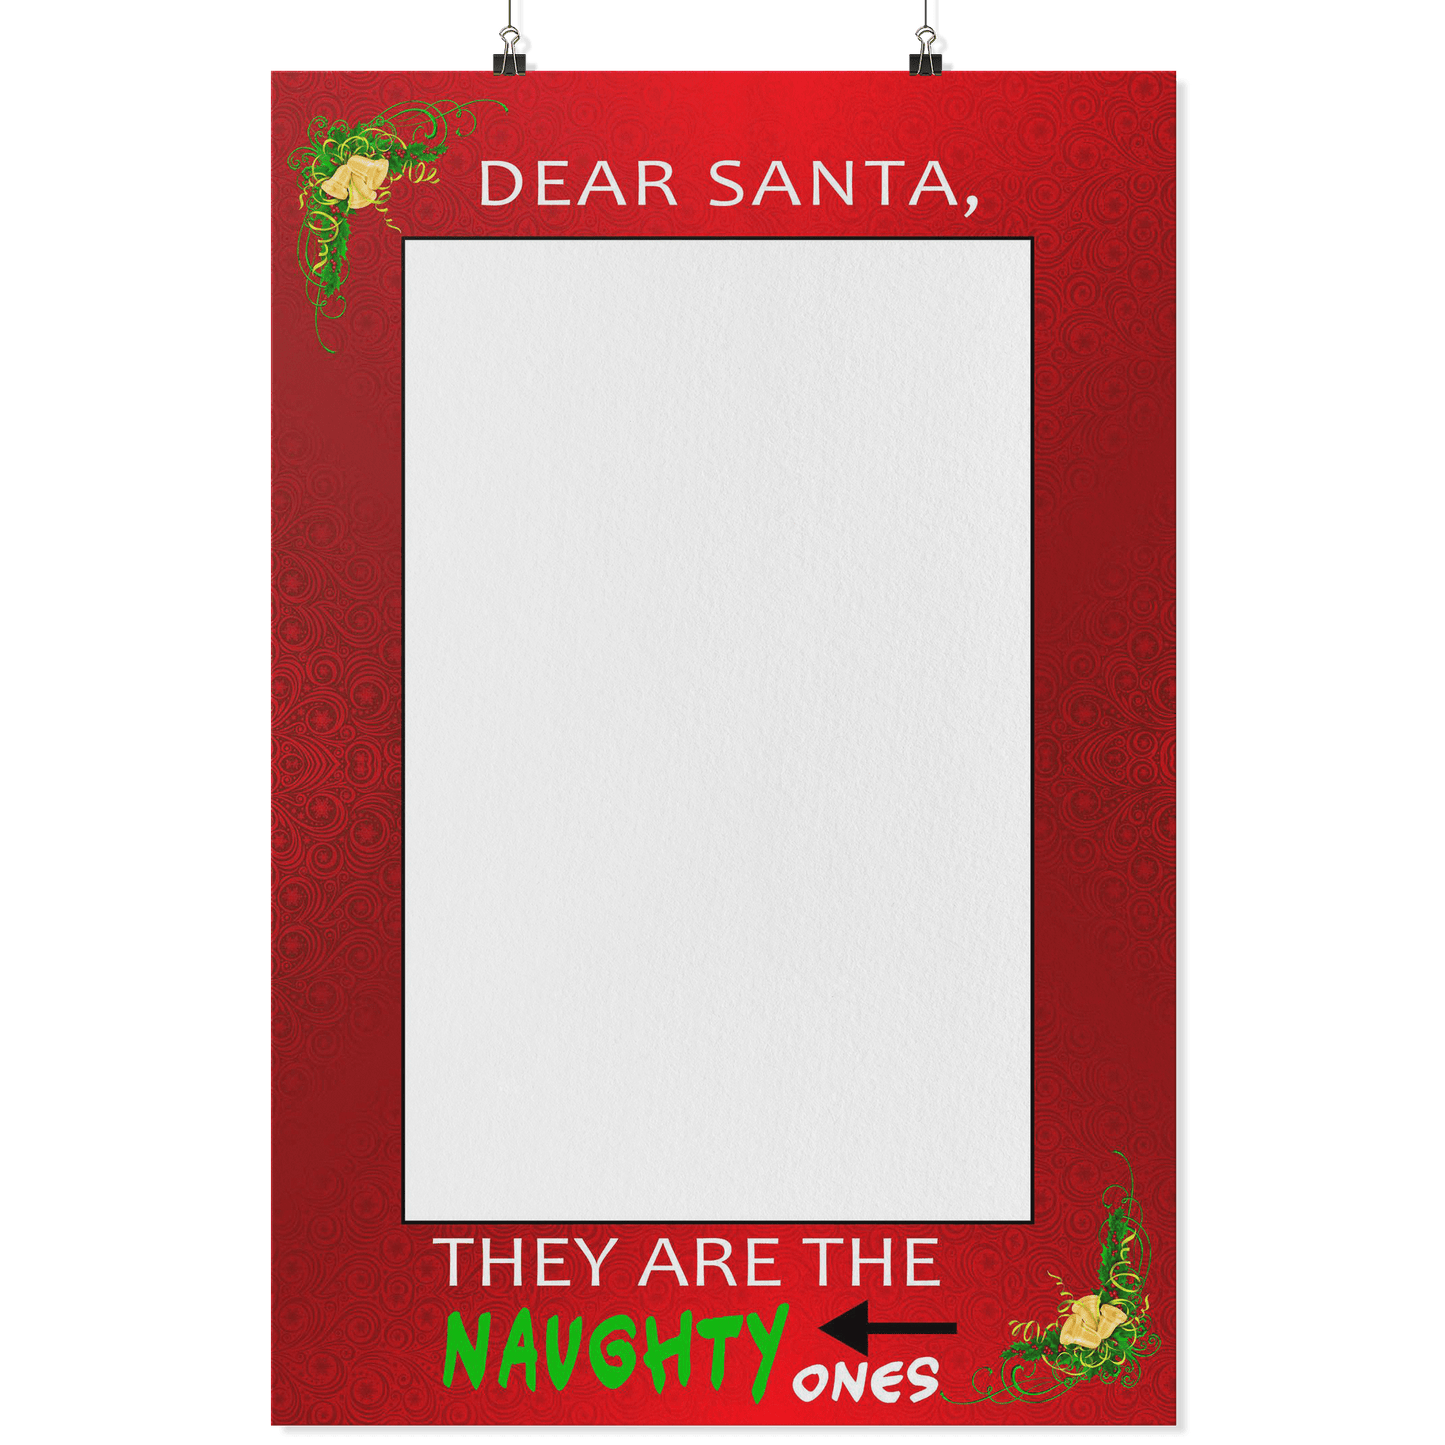 Dear Santa, They are the naughty ones! | Santa's Naughty List Photo Prop Frame | Santa Claus-Posters-TD Gift Solutions.com